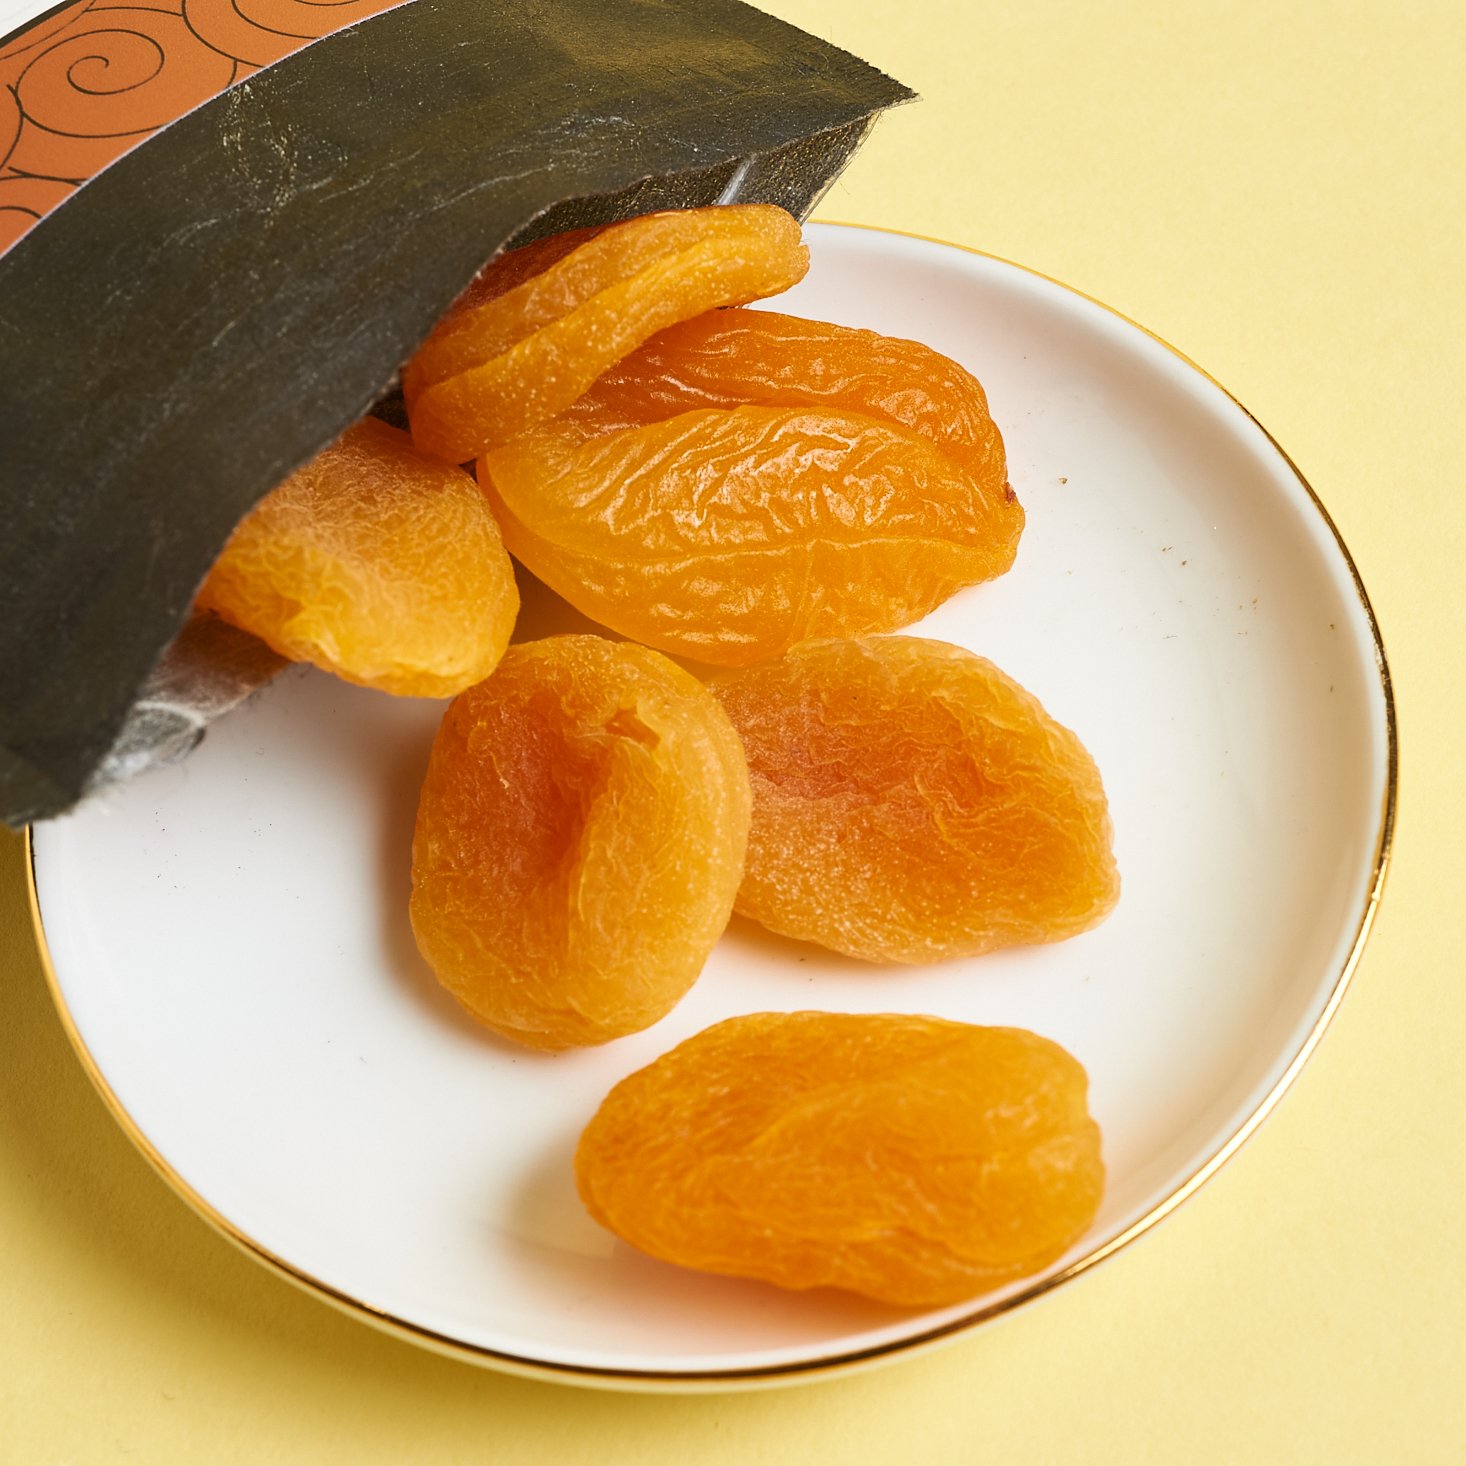 An open bag of dried apricots spilling onto a plate